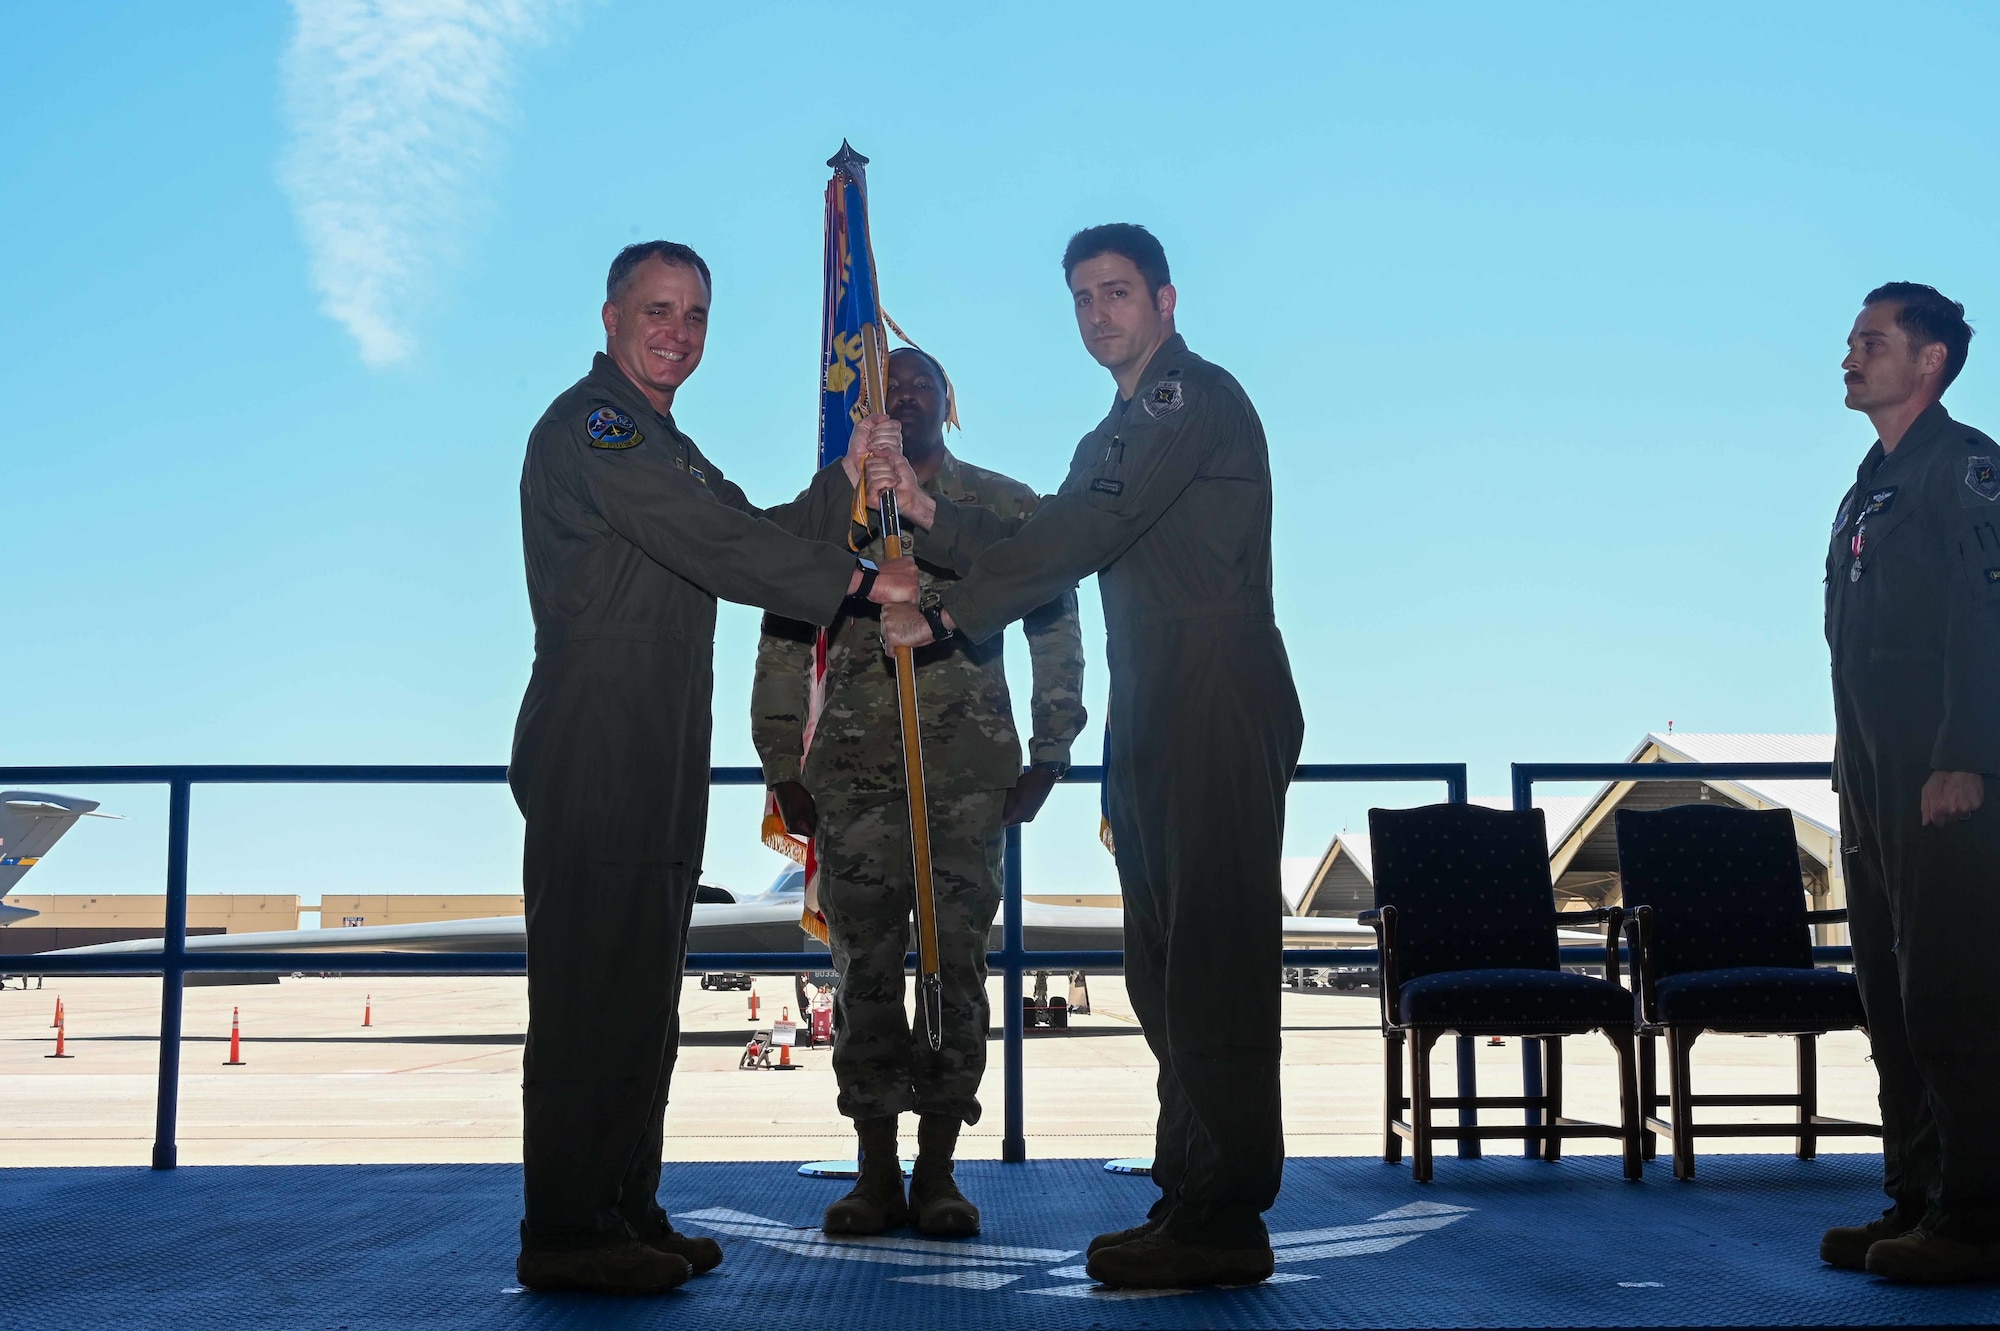 U.S. Air Force Col. Keith Butler, 509th Operation Group commander, passes the unit flag to U.S. Air Force Lt. Col. Andrew Kousgaard, incoming 393rd Bomb Squadron commander, during the 393rd Bomb Squadron change of command ceremony at Whiteman Air Force Base, MO, June 3, 2022. Military change-of-commands are a time-honored tradition that formally symbolize the continuity of authority as the command passes from one individual to another. The transfer of command is physically represented by handing the unit flag, from the outgoing commander to the new incoming commander. (U.S. Air Force photo by Airman 1st Class Devan Halstead)